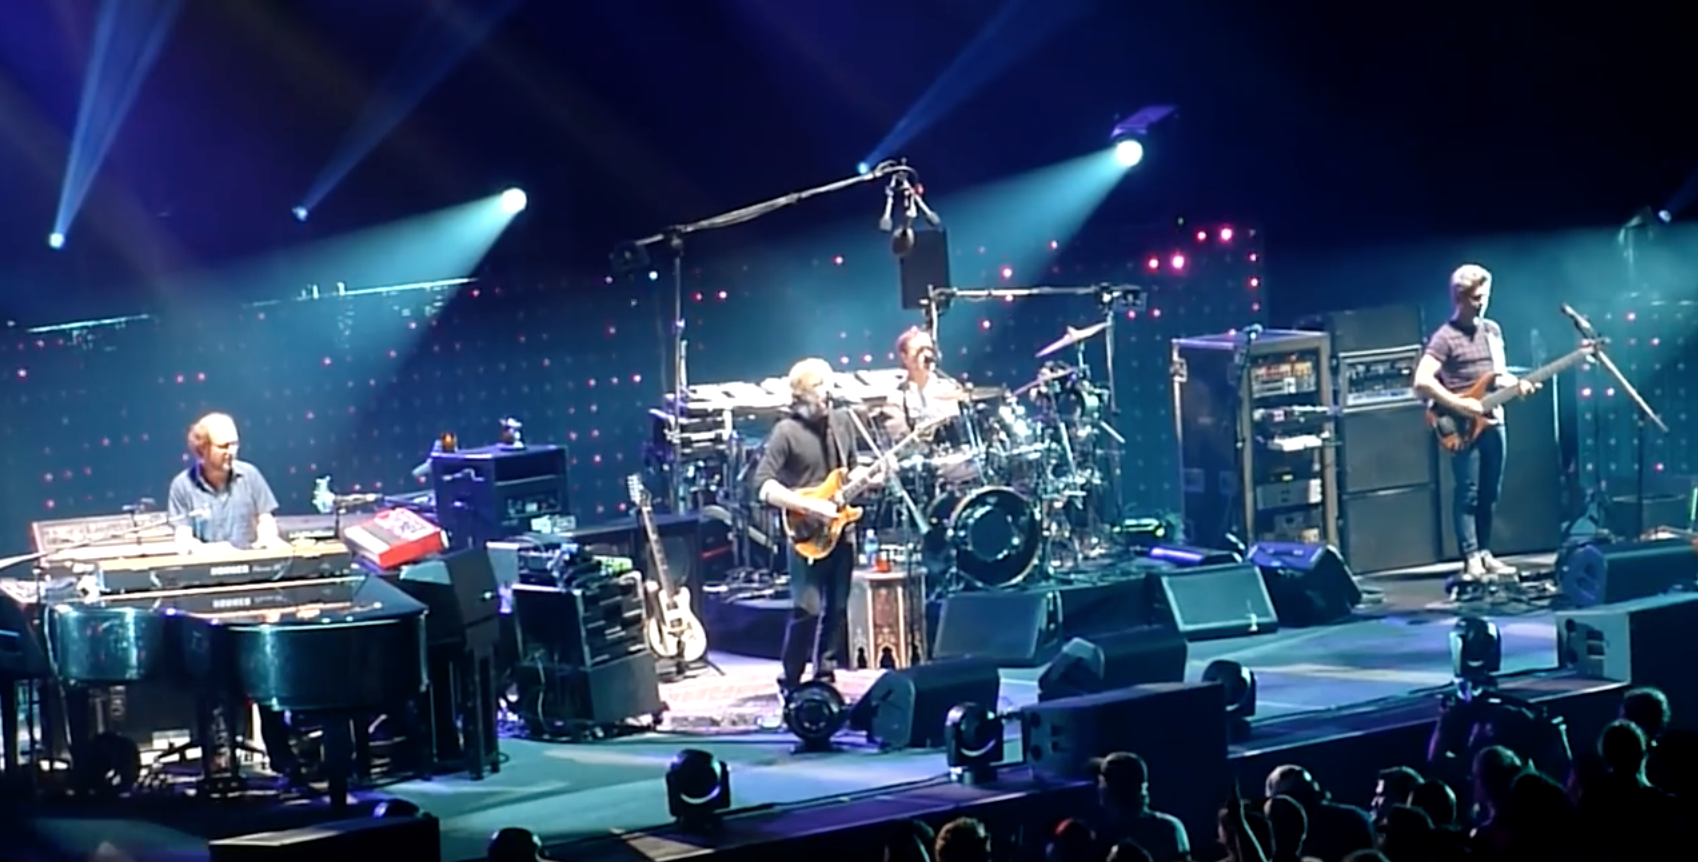 Watch Highlights from Phish’s Tour Opener Including Their New Lighting Rig